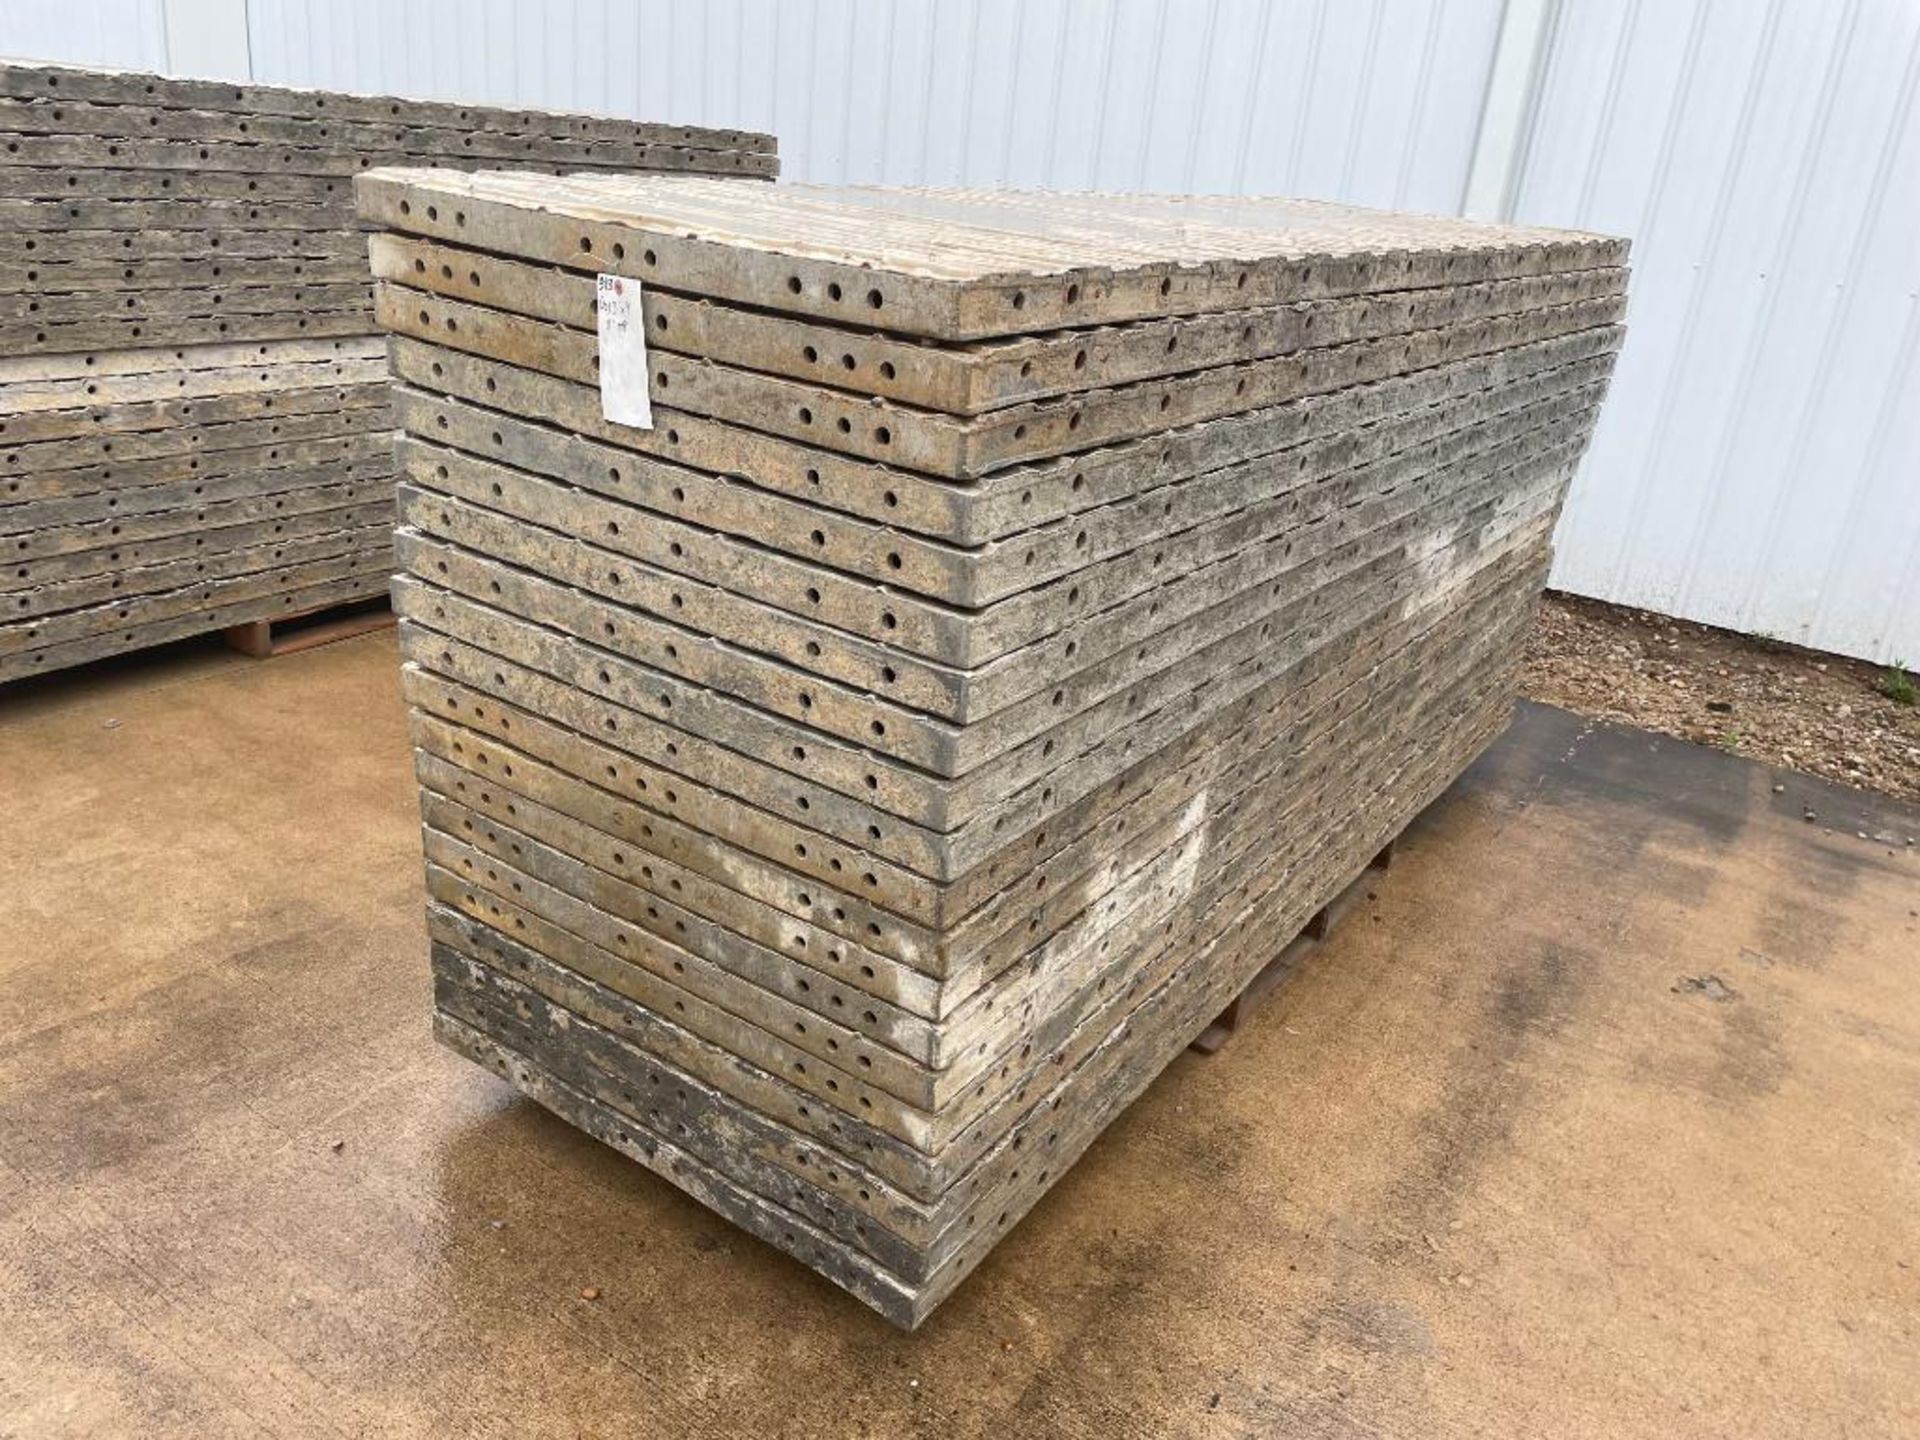 (20) 3' x 9' Wall-Ties Textured Brick Aluminum Concrete Forms 8" Hole Pattern. Located in Mt. Pleasa